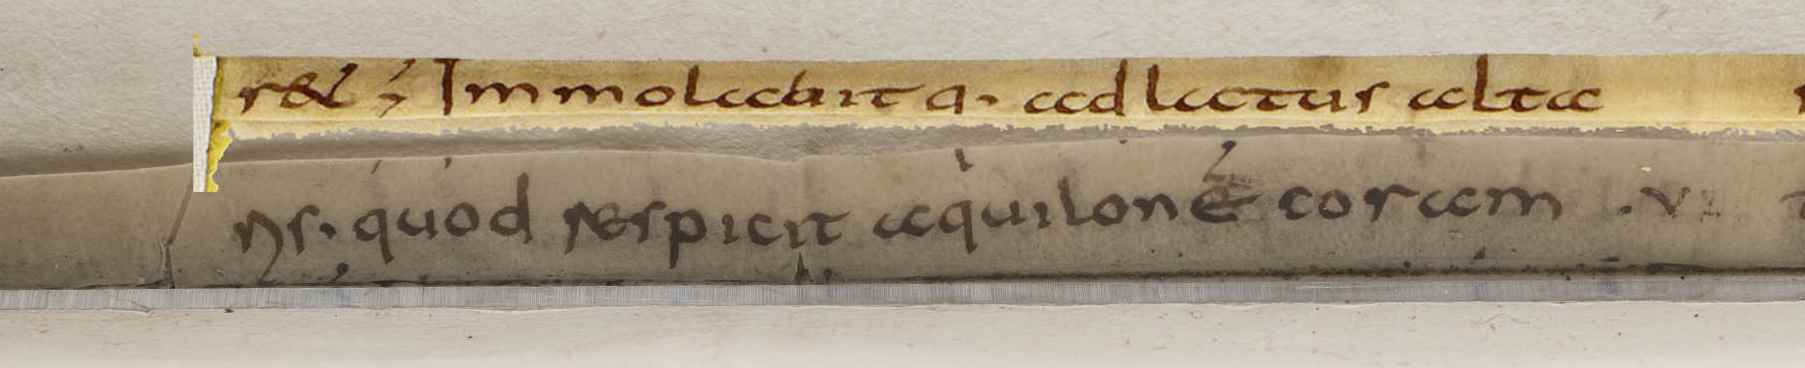 Detail from Mullins, “Carolingian Bible Fragments in Dublin”, p. 82, showing part of a quire guard from Auckland Libraries Heritage Collection, 1480 BIBL (IV) (above) against a similar fragment in situ in University College Dublin Special Collections, OFM XL (III), f. 240/241.